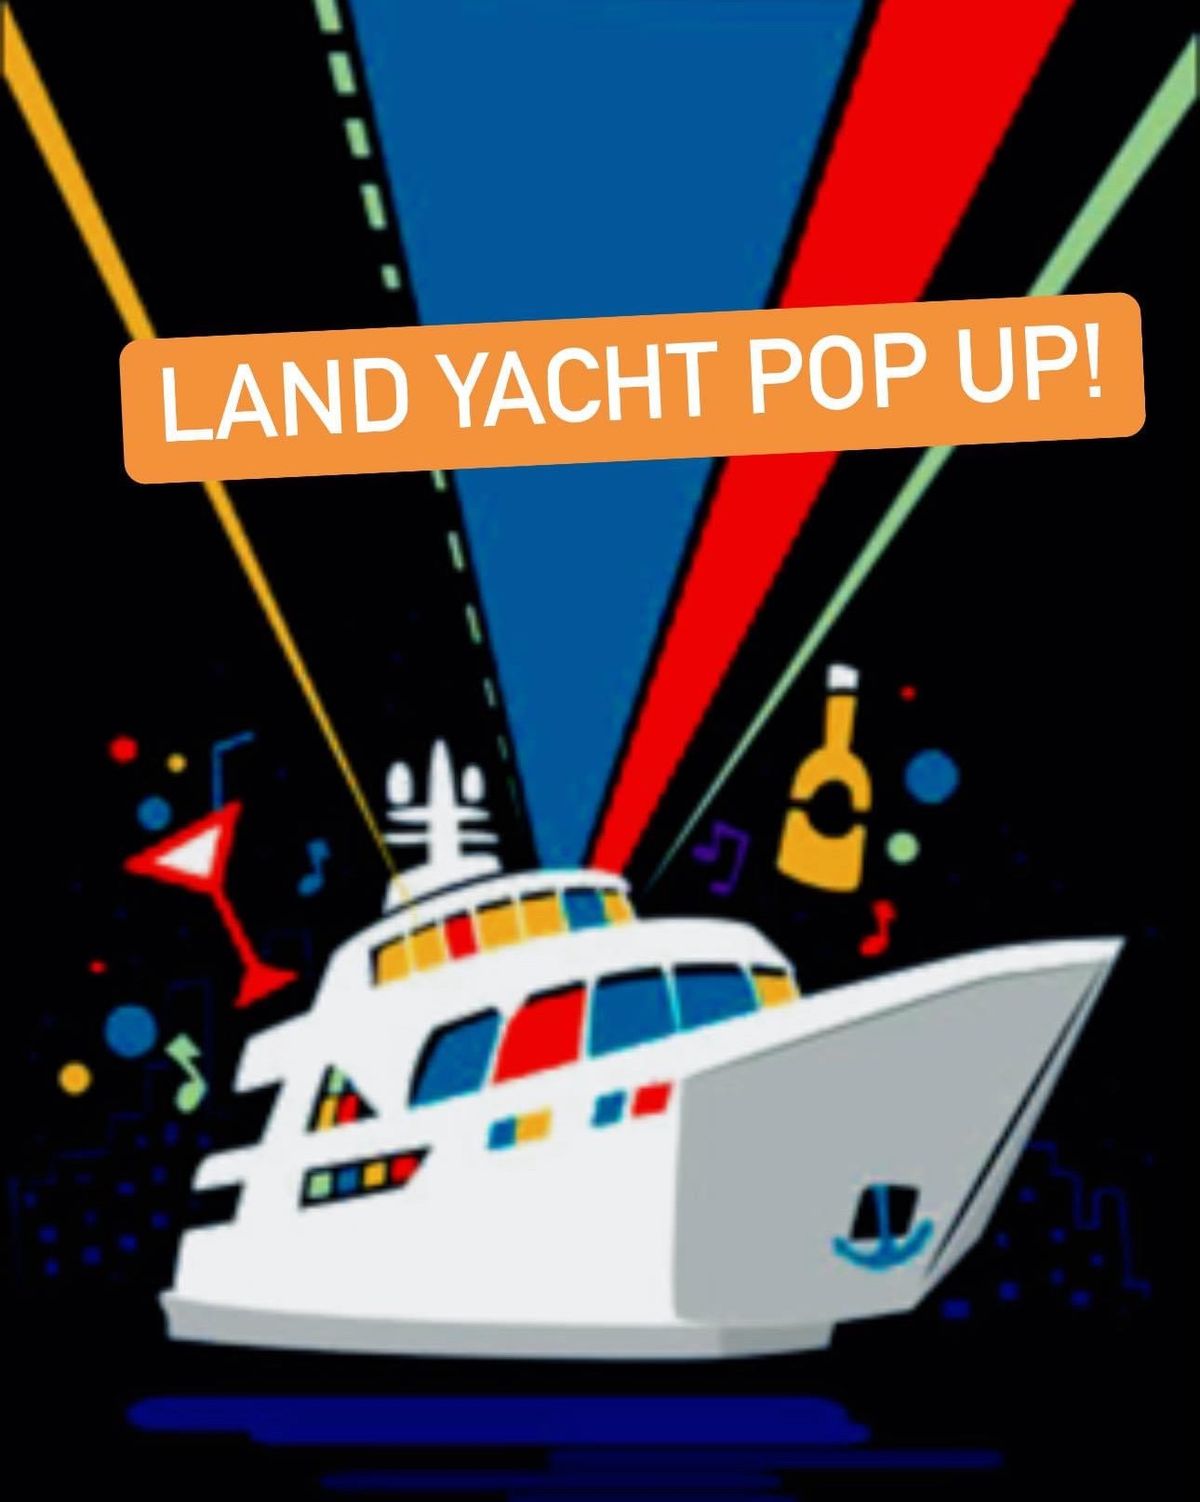 Land Yacht Pop Up Party!